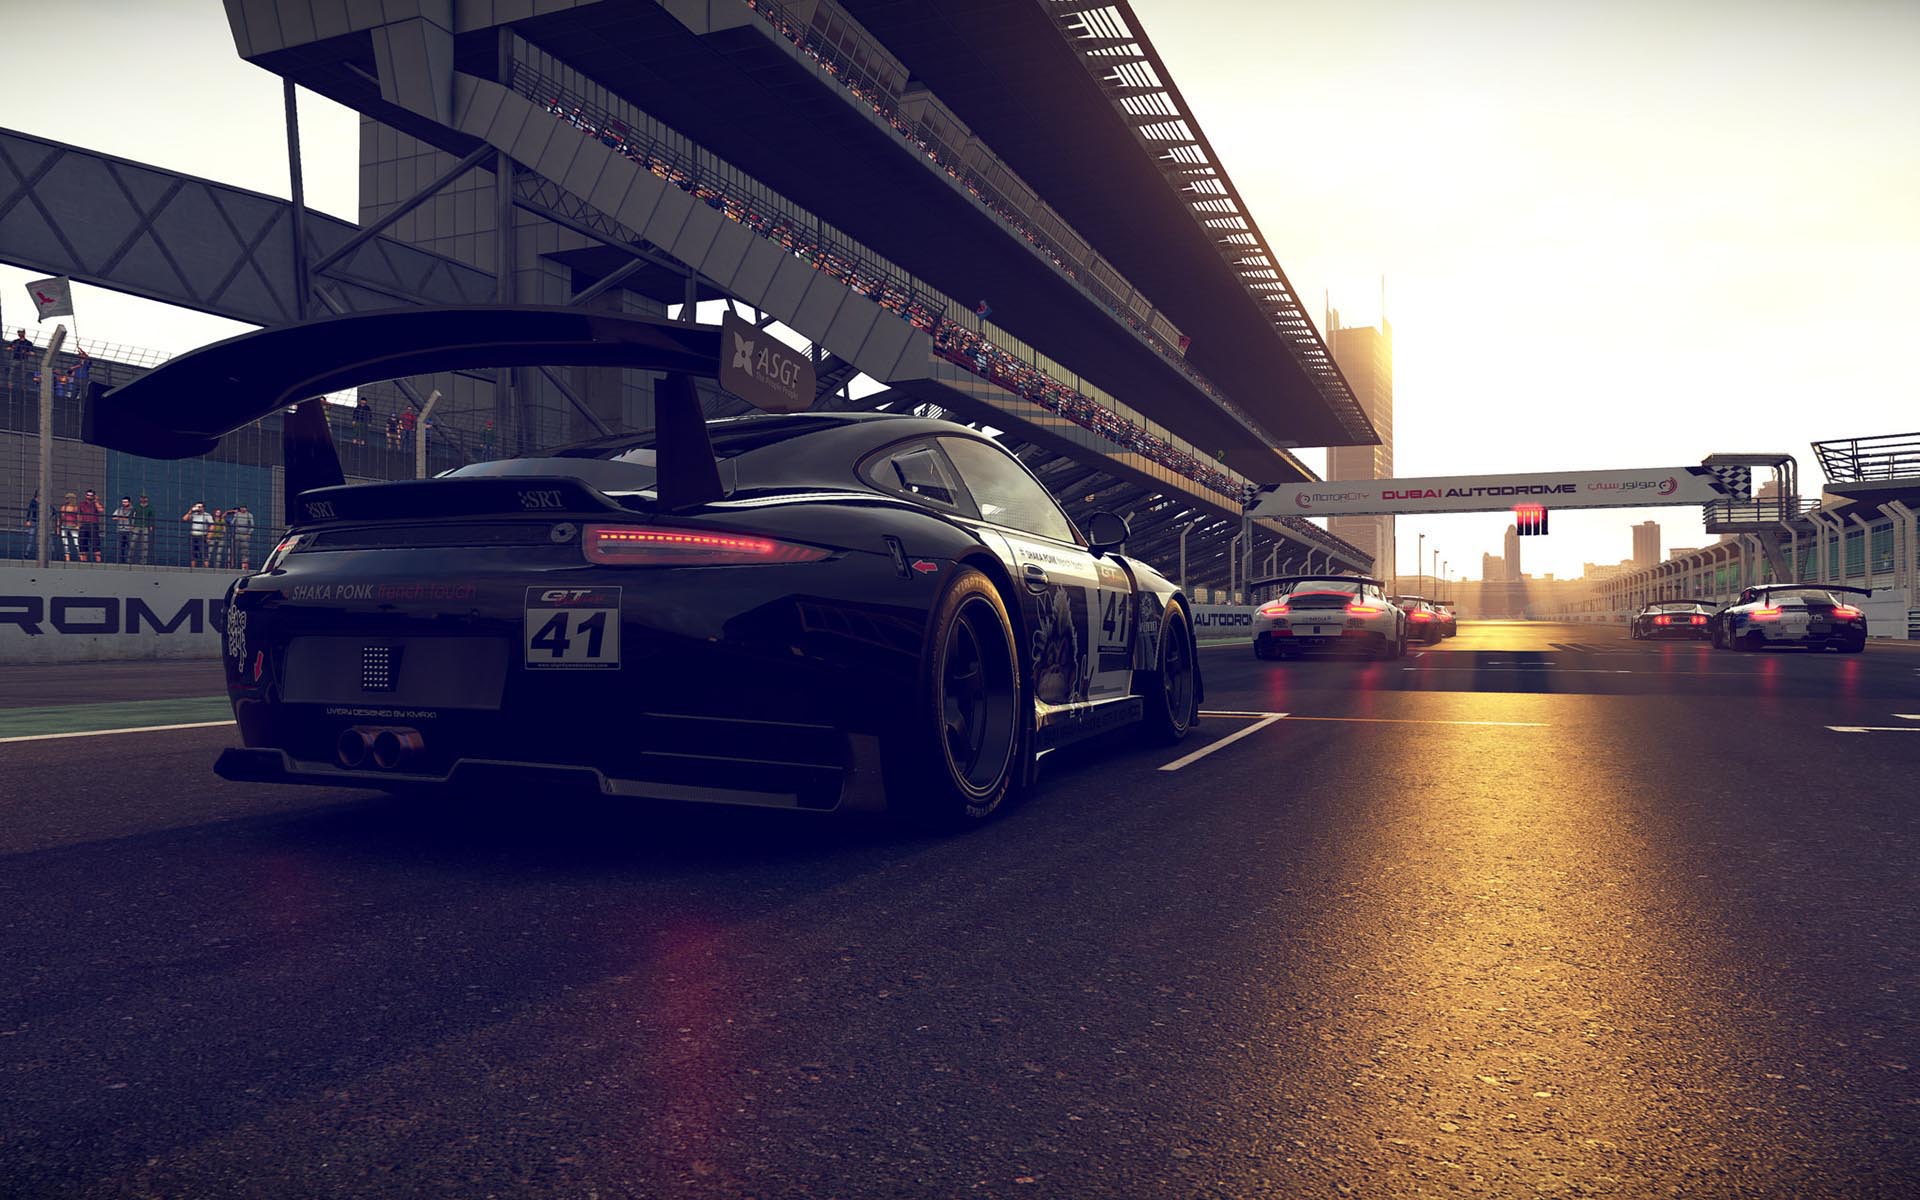 <i>Project CARS</i> launched to much fanfare back in May and just received its first expansion pack last week – and a sequel has already been announced. The simulation-style racing game is known for its gorgeous graphics and unforgiving gameplay. | <b>For:</b> PC, PS4, Xbox One (Wii U version cancelled)